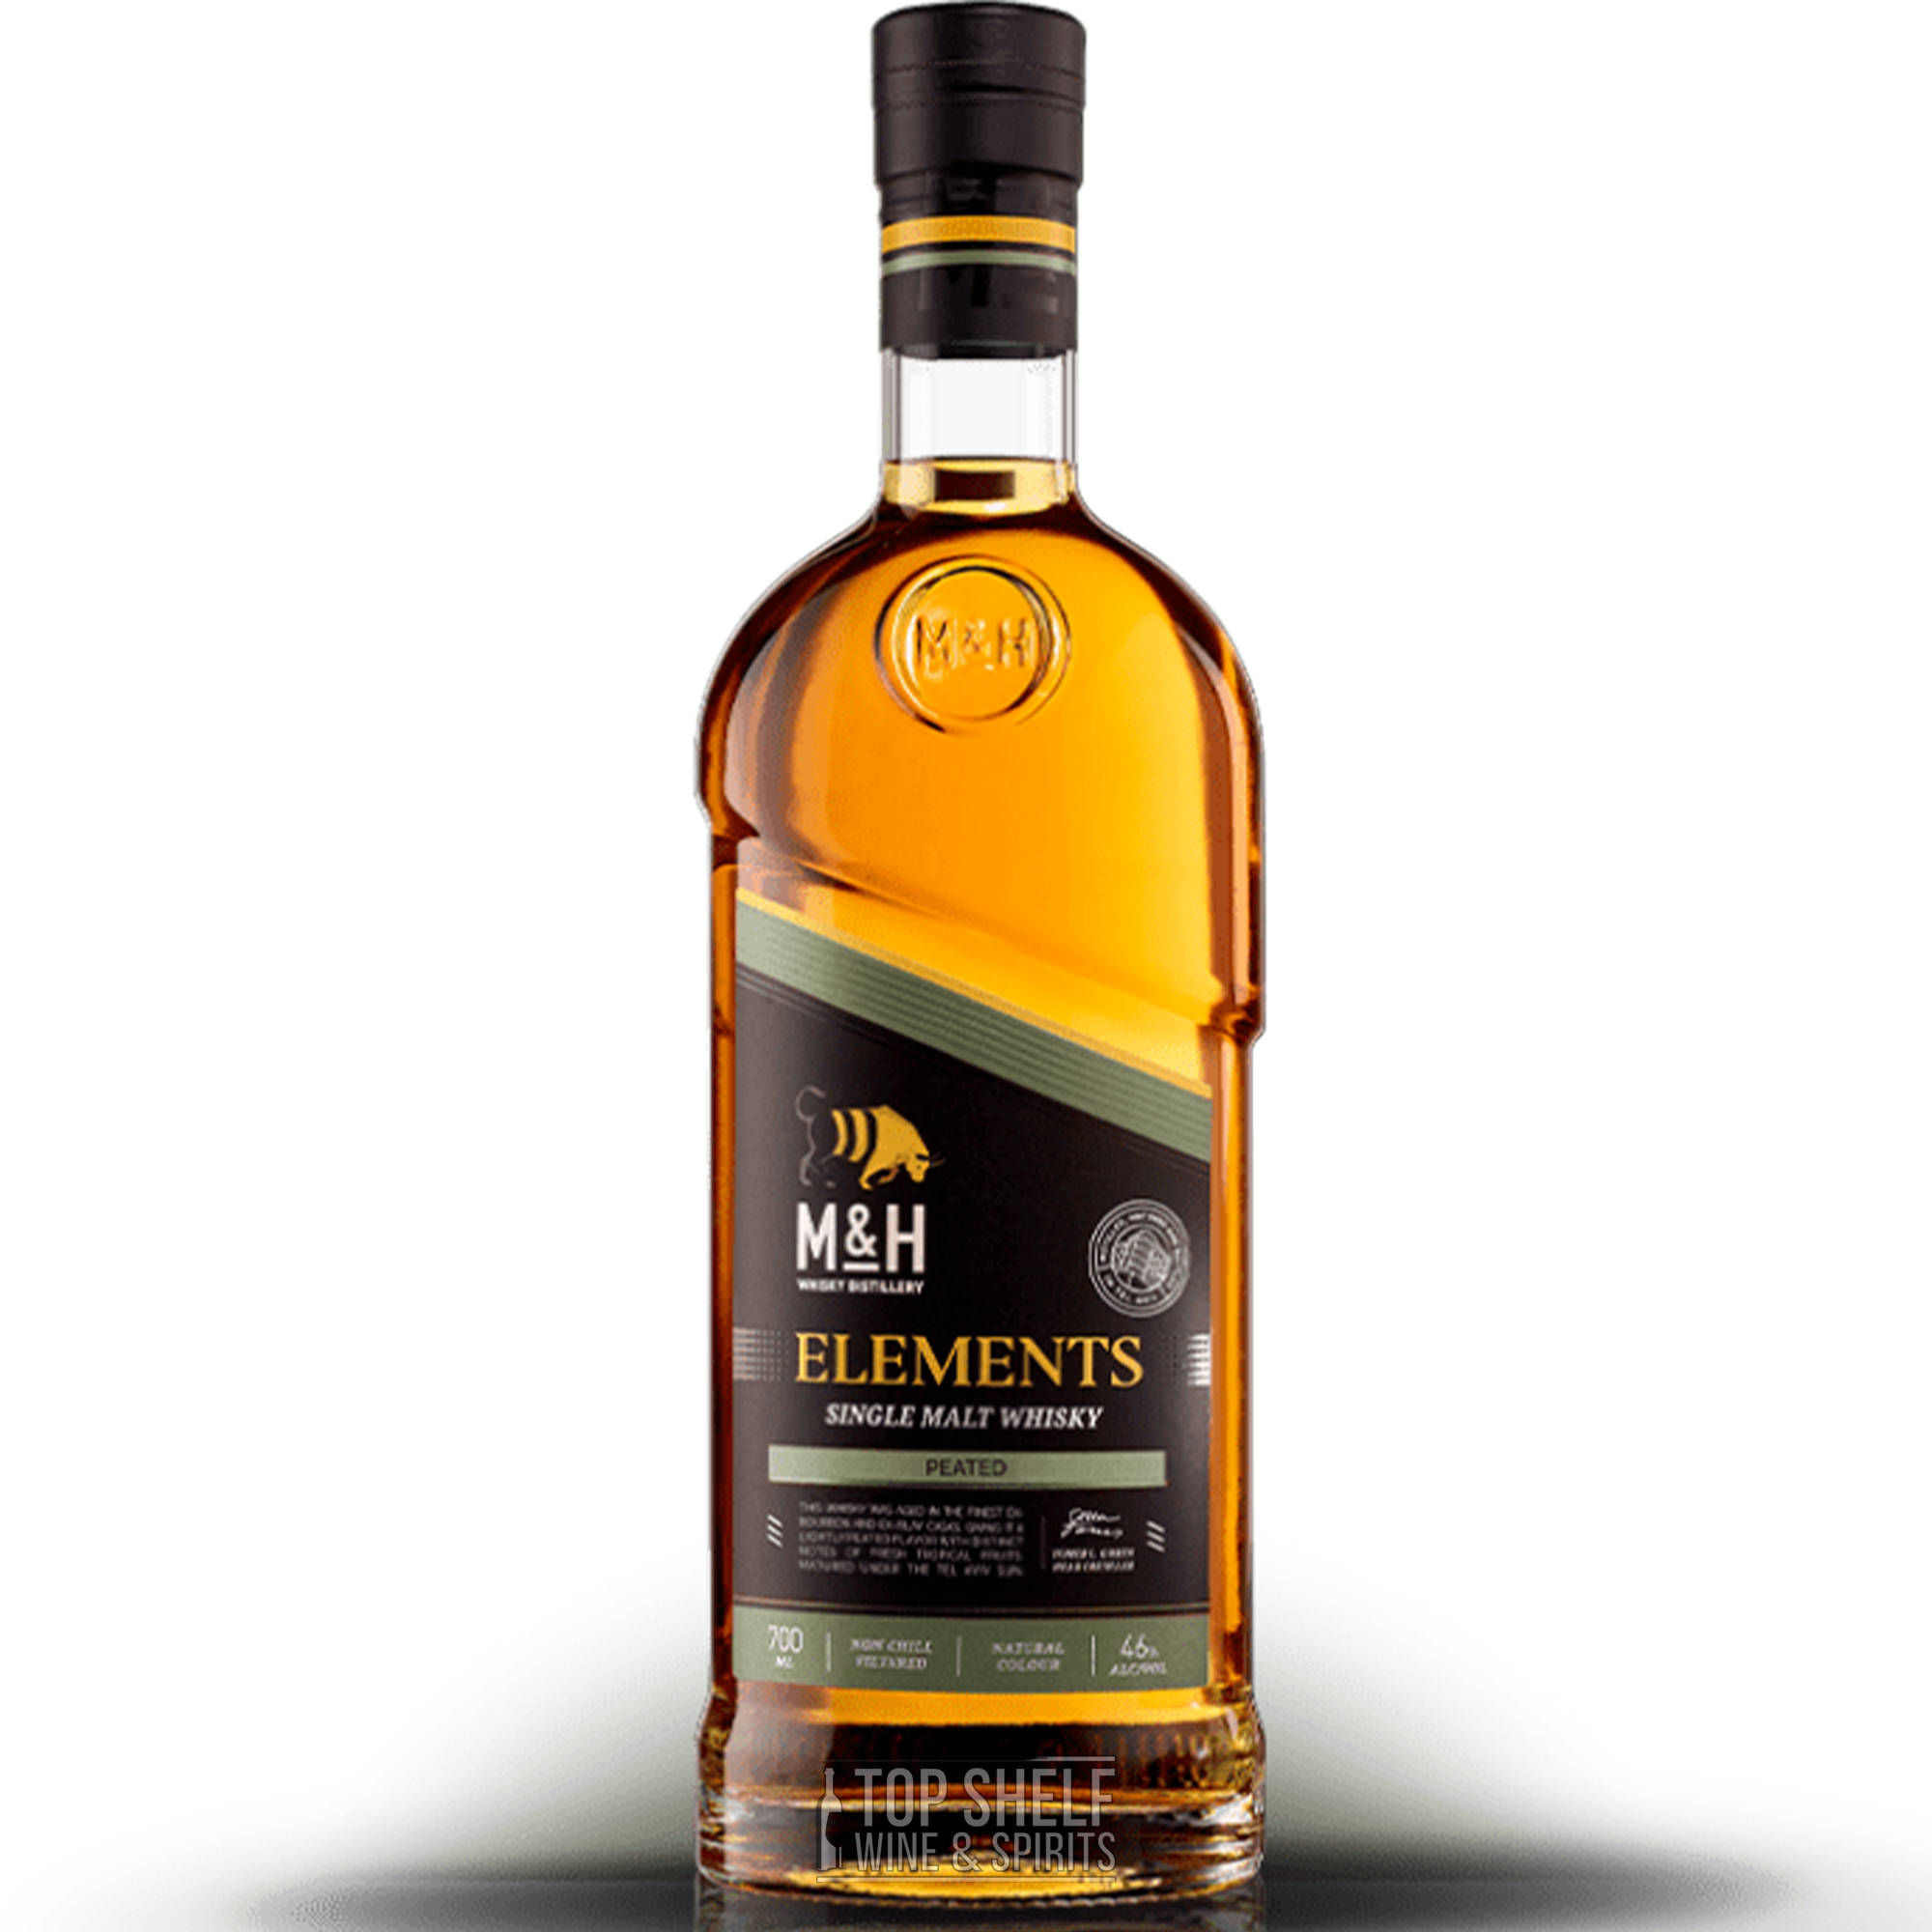 The M and H Distillery Elements Peated Single Malt Whisky